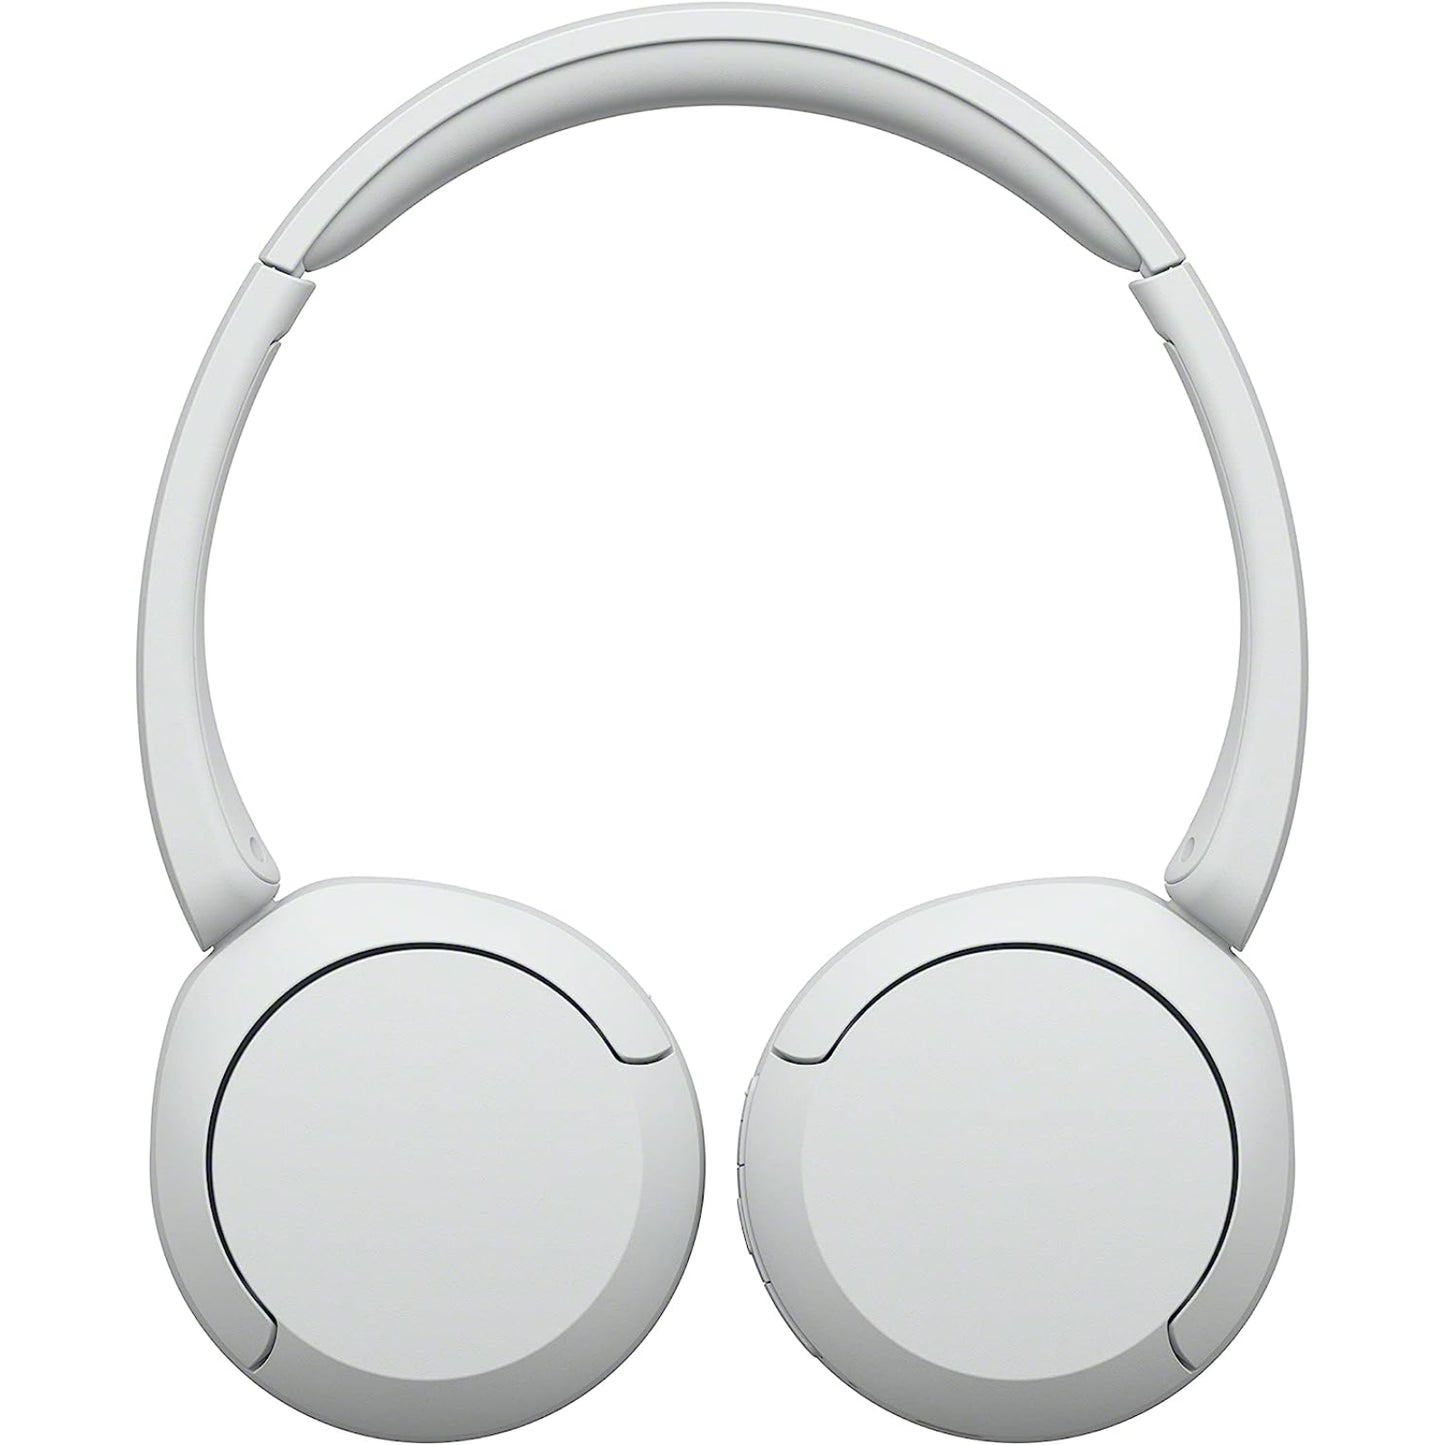 Sony WH-CH520 Wireless Over-Ear Headphone (White)